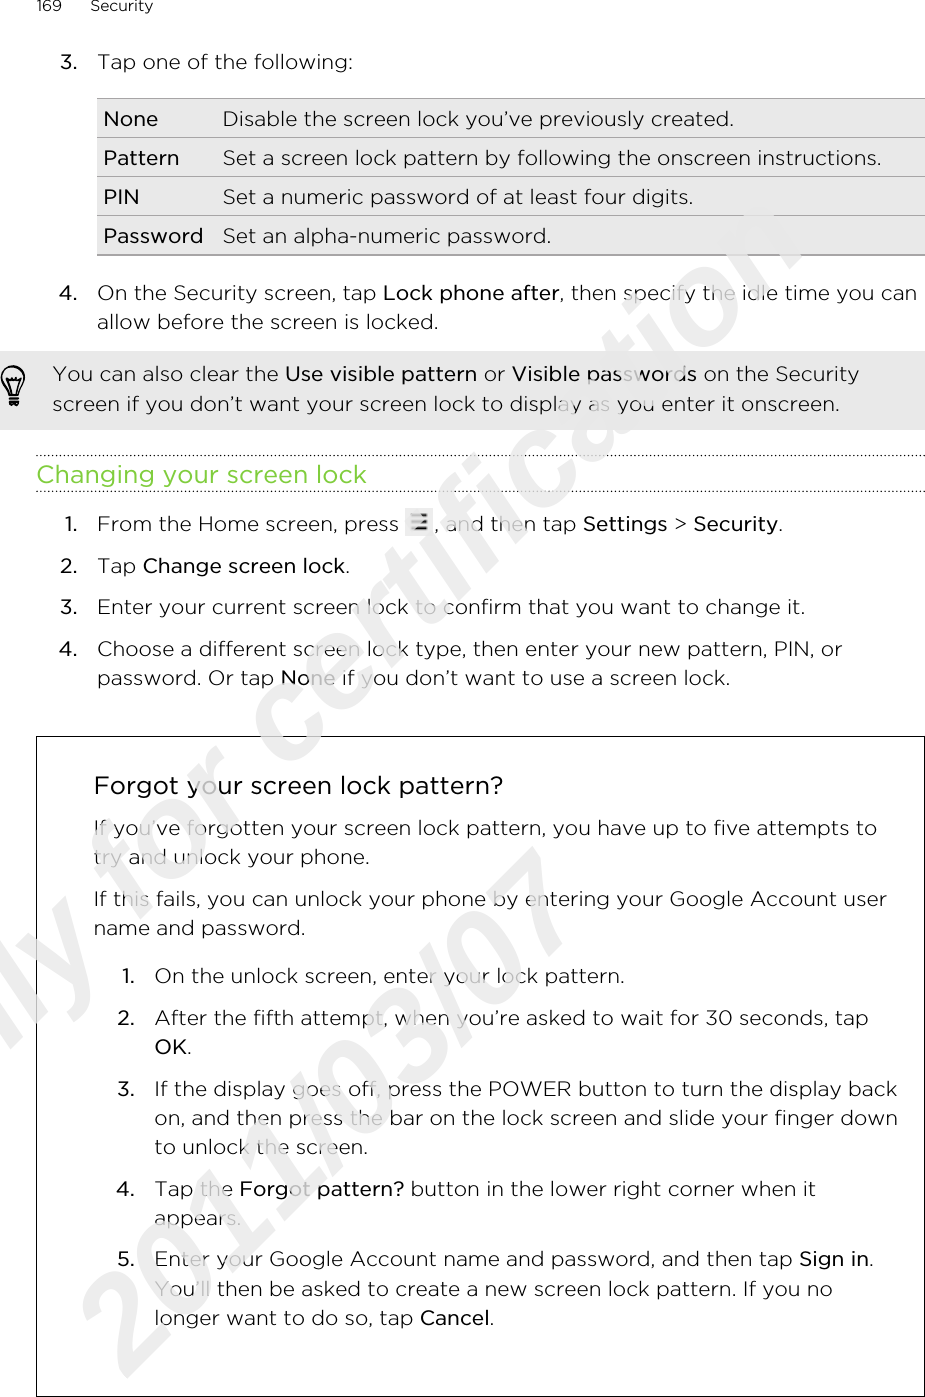 3. Tap one of the following:None Disable the screen lock you’ve previously created.Pattern Set a screen lock pattern by following the onscreen instructions.PIN Set a numeric password of at least four digits.Password Set an alpha-numeric password.4. On the Security screen, tap Lock phone after, then specify the idle time you canallow before the screen is locked. You can also clear the Use visible pattern or Visible passwords on the Securityscreen if you don’t want your screen lock to display as you enter it onscreen.Changing your screen lock1. From the Home screen, press  , and then tap Settings &gt; Security.2. Tap Change screen lock.3. Enter your current screen lock to confirm that you want to change it.4. Choose a different screen lock type, then enter your new pattern, PIN, orpassword. Or tap None if you don’t want to use a screen lock.Forgot your screen lock pattern?If you’ve forgotten your screen lock pattern, you have up to five attempts totry and unlock your phone.If this fails, you can unlock your phone by entering your Google Account username and password.1. On the unlock screen, enter your lock pattern.2. After the fifth attempt, when you’re asked to wait for 30 seconds, tapOK.3. If the display goes off, press the POWER button to turn the display backon, and then press the bar on the lock screen and slide your finger downto unlock the screen.4. Tap the Forgot pattern? button in the lower right corner when itappears.5. Enter your Google Account name and password, and then tap Sign in.You’ll then be asked to create a new screen lock pattern. If you nolonger want to do so, tap Cancel.169 SecurityOnly for certification  2011/03/07